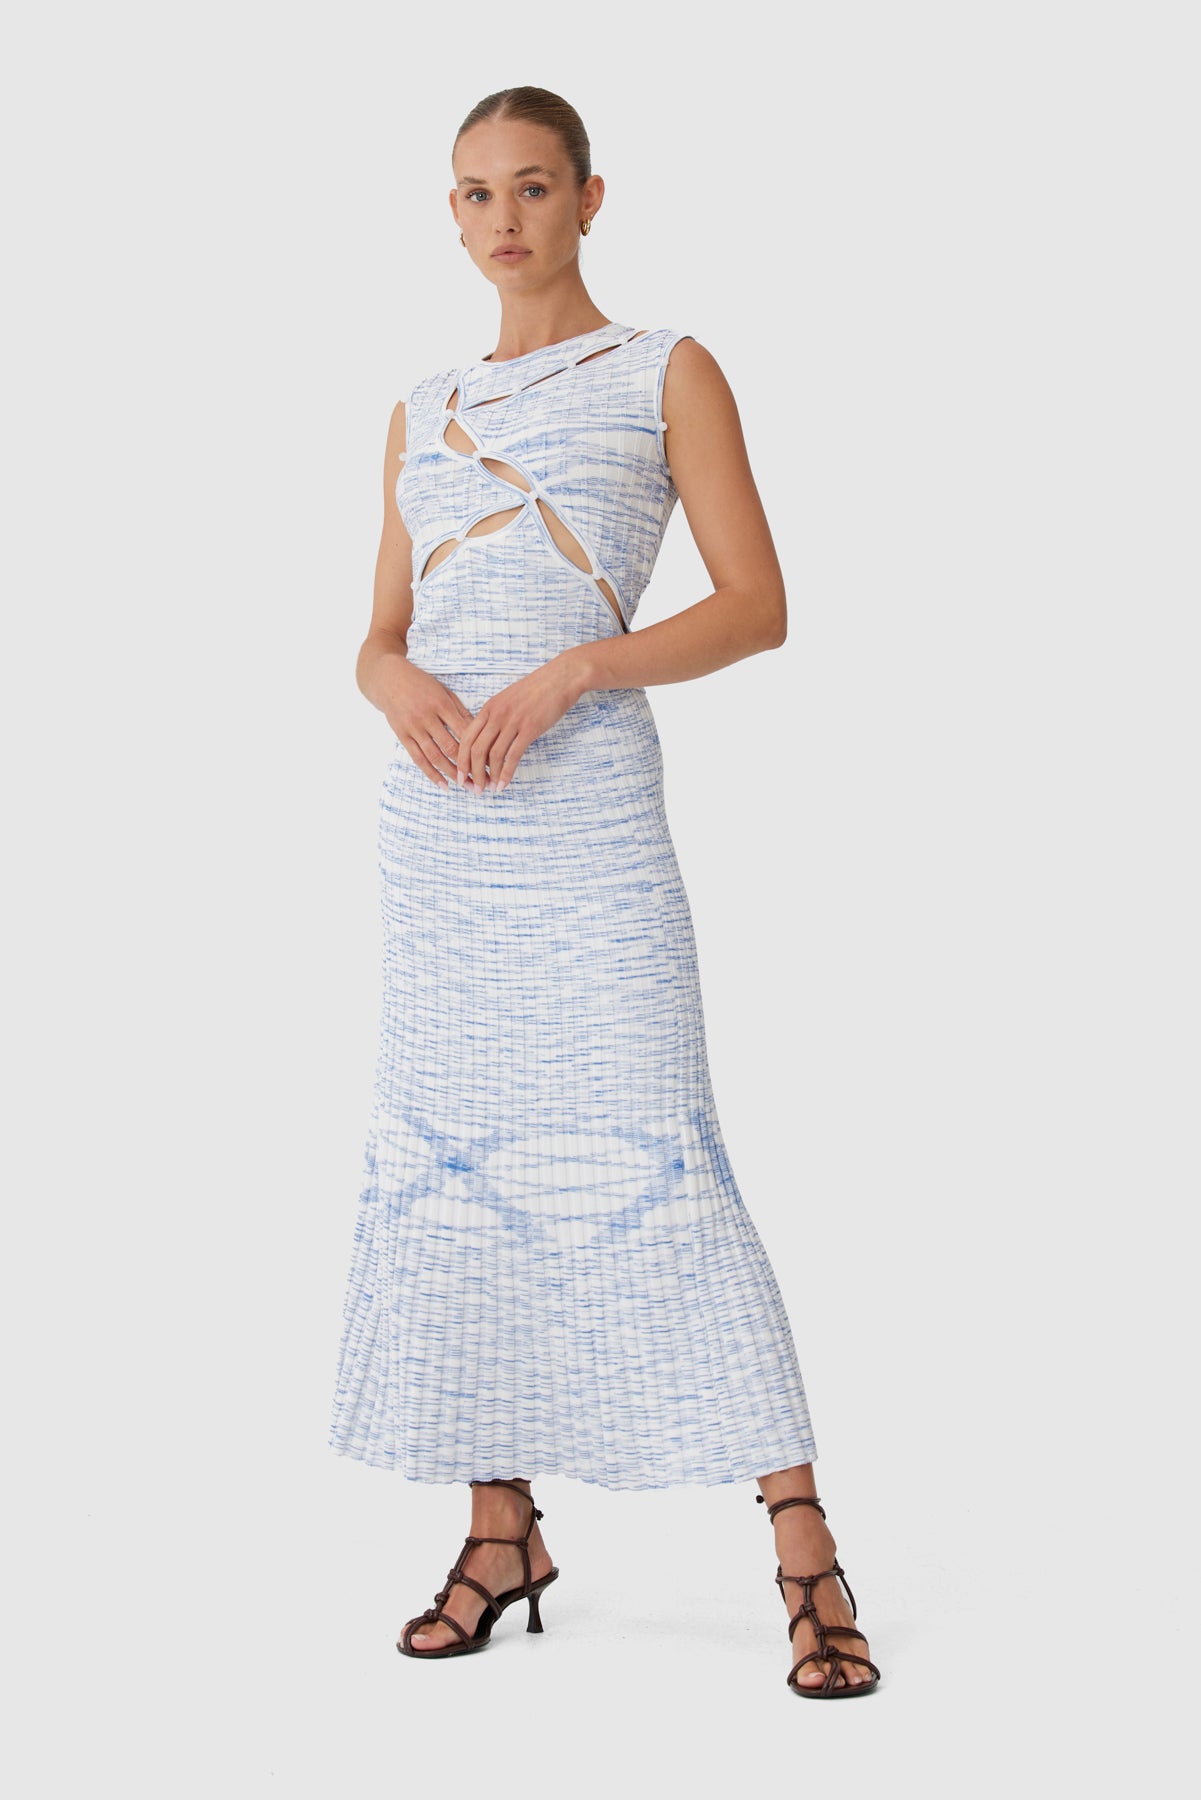 C/MEO Collective - Eventually Knit Skirt - White W Blue Marle